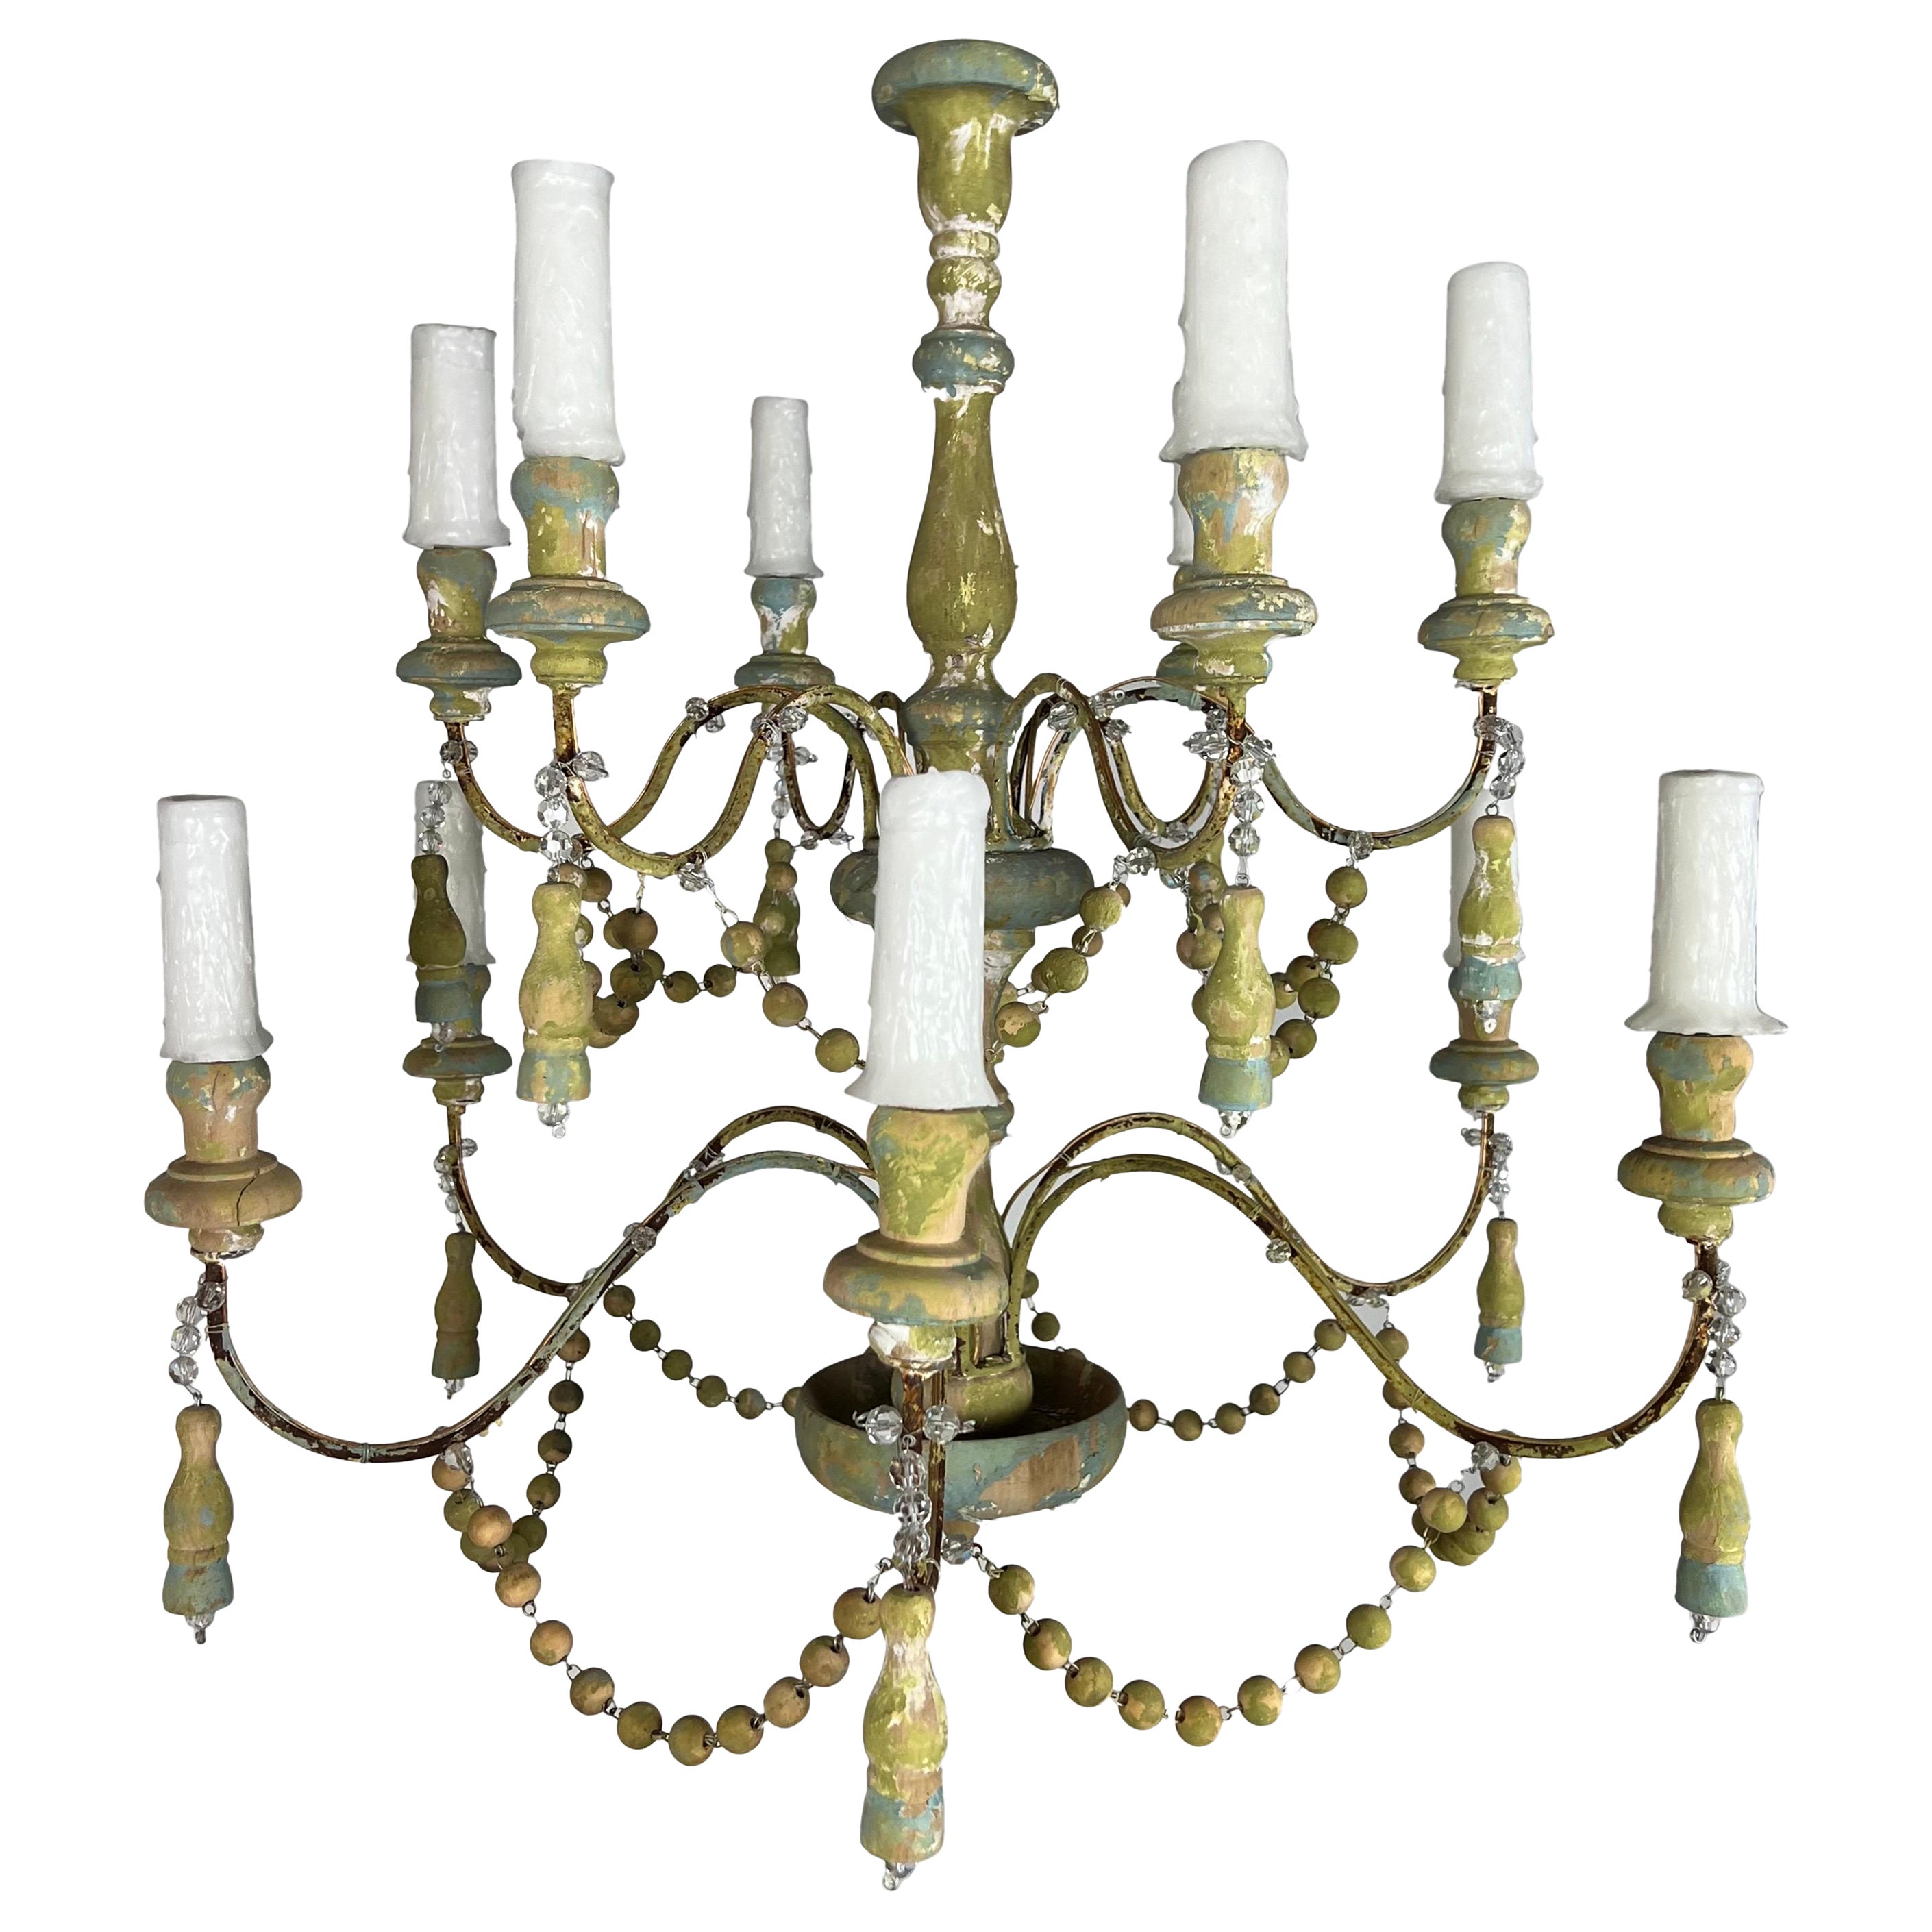 12-Arm Painted Wood Beaded Chandelier with Tassels For Sale